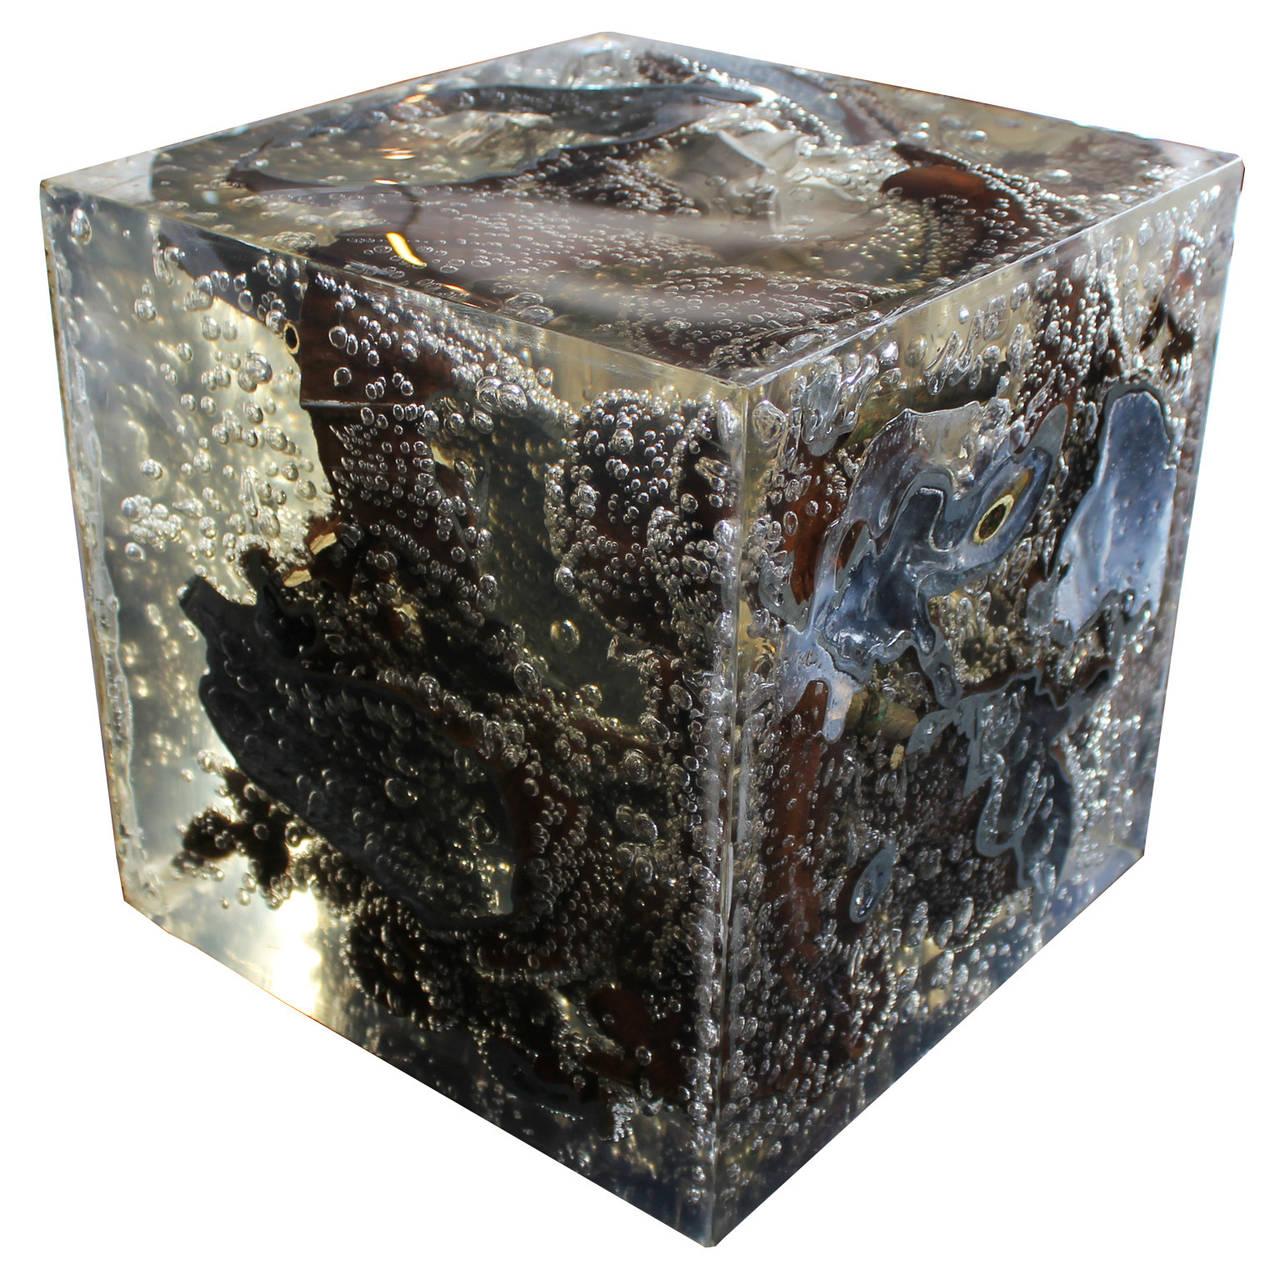 Unique modern resin sculpture with a cut pieces of bronze suspended in the resin. Within the cube are bubbles of air that create a galaxy like effect that add to the unique quality of the piece. On one of the faces of the cube is the artist's